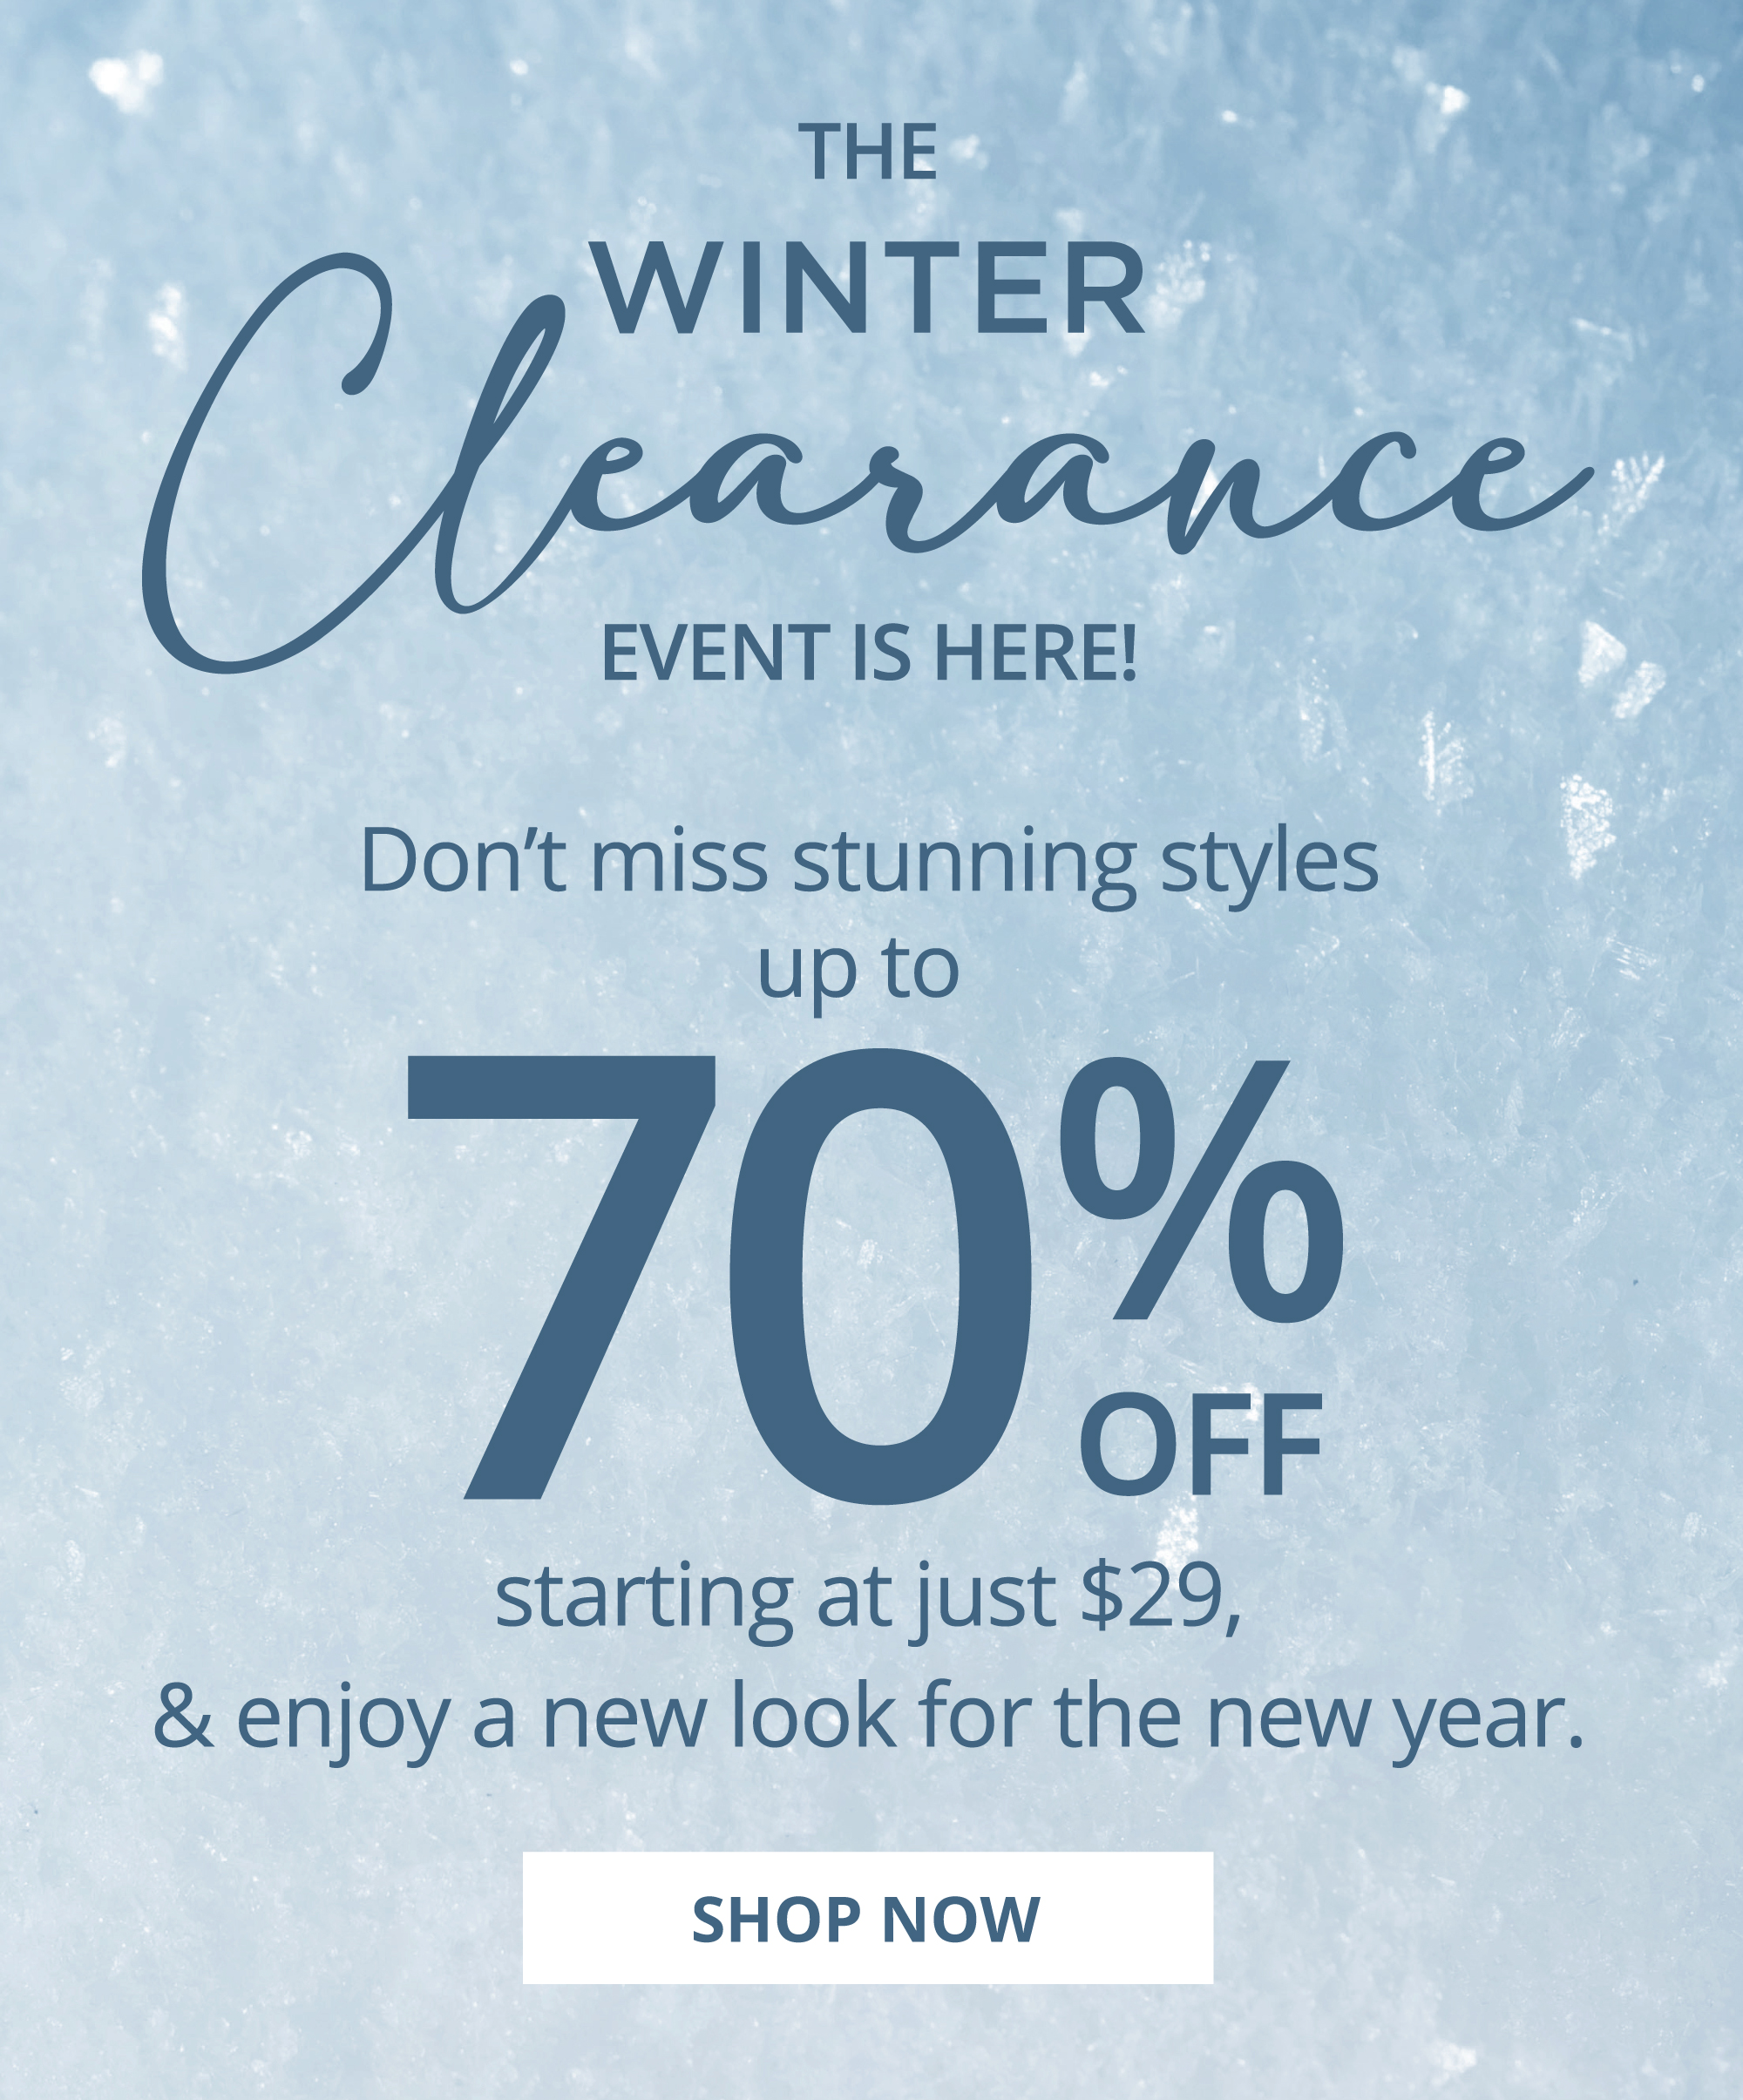 R THE , WINTER EVENT IS HERE! Don't miss stunning styles up to 02 starting at just $29, enjoy a new look for the new year. SHOP NOW 